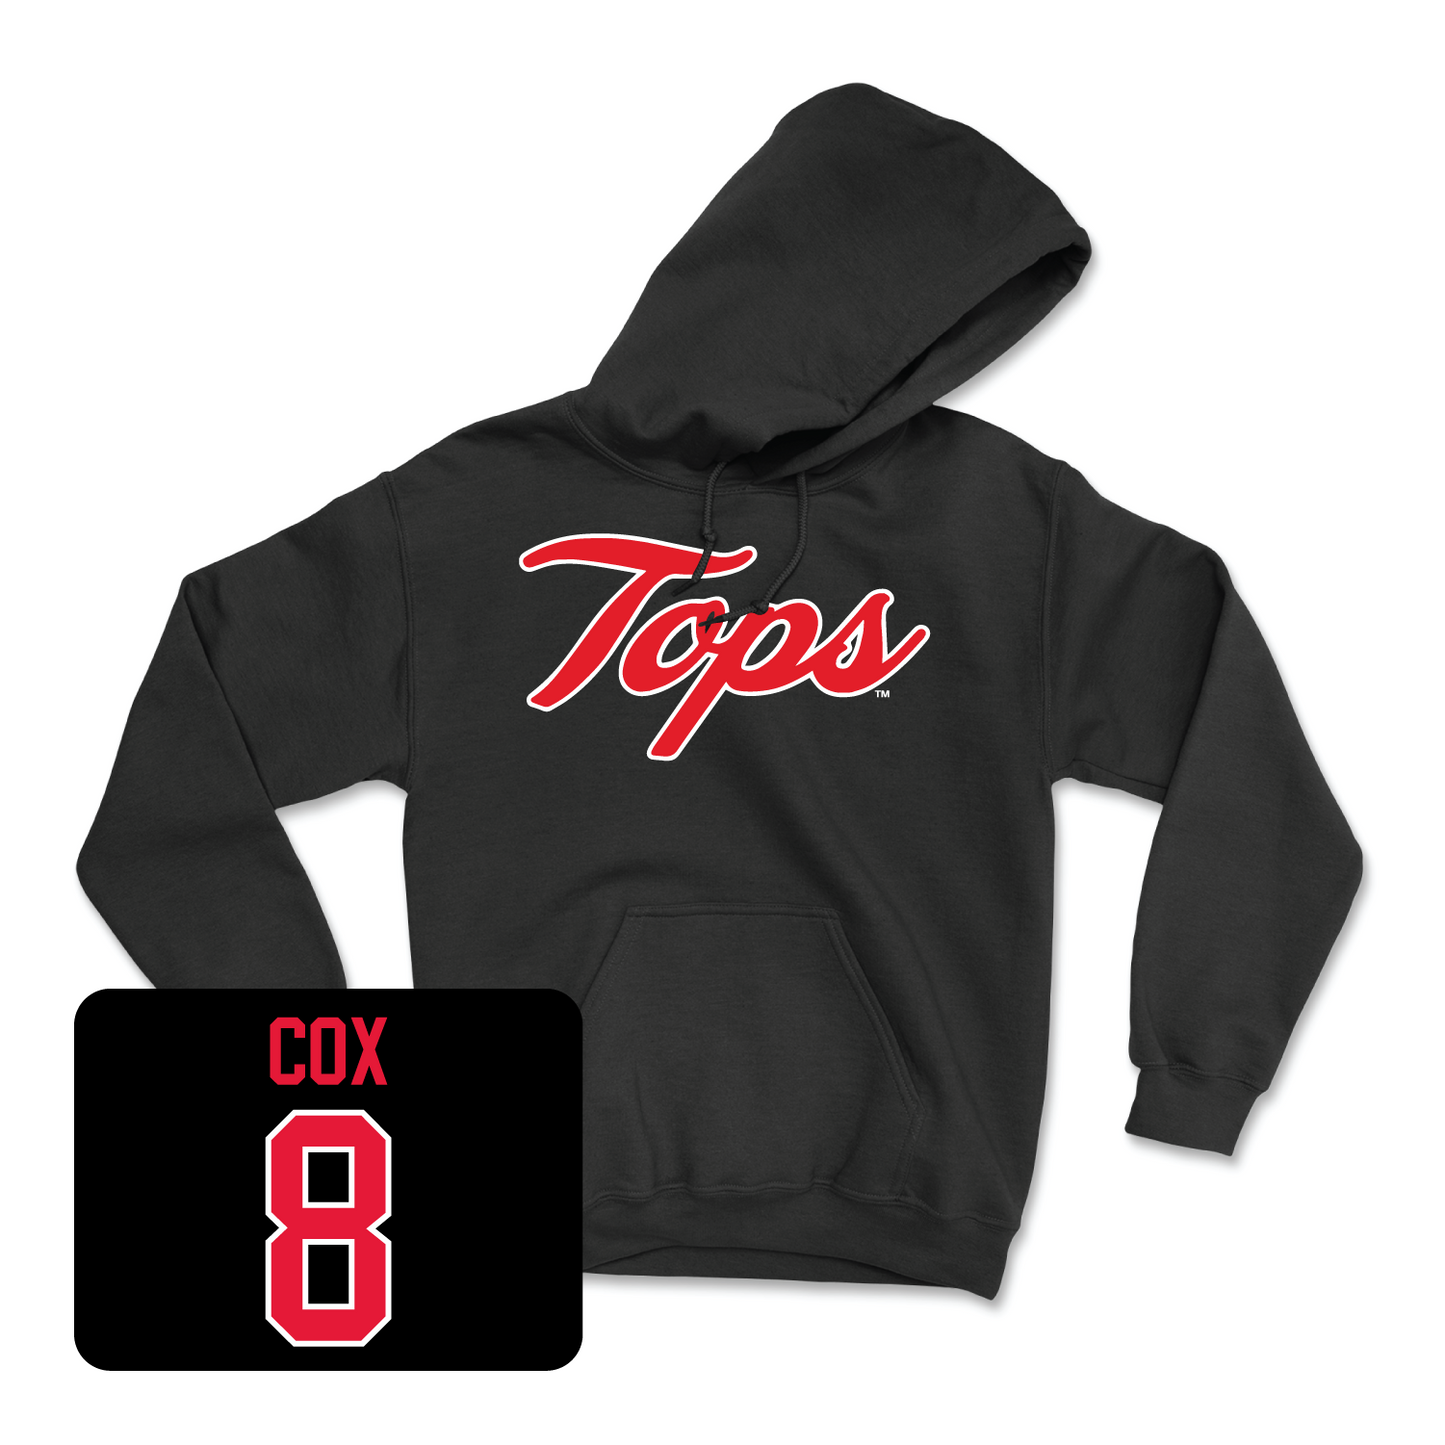 Black Women's Volleyball Tops Hoodie Small / Kaylee Cox | #8